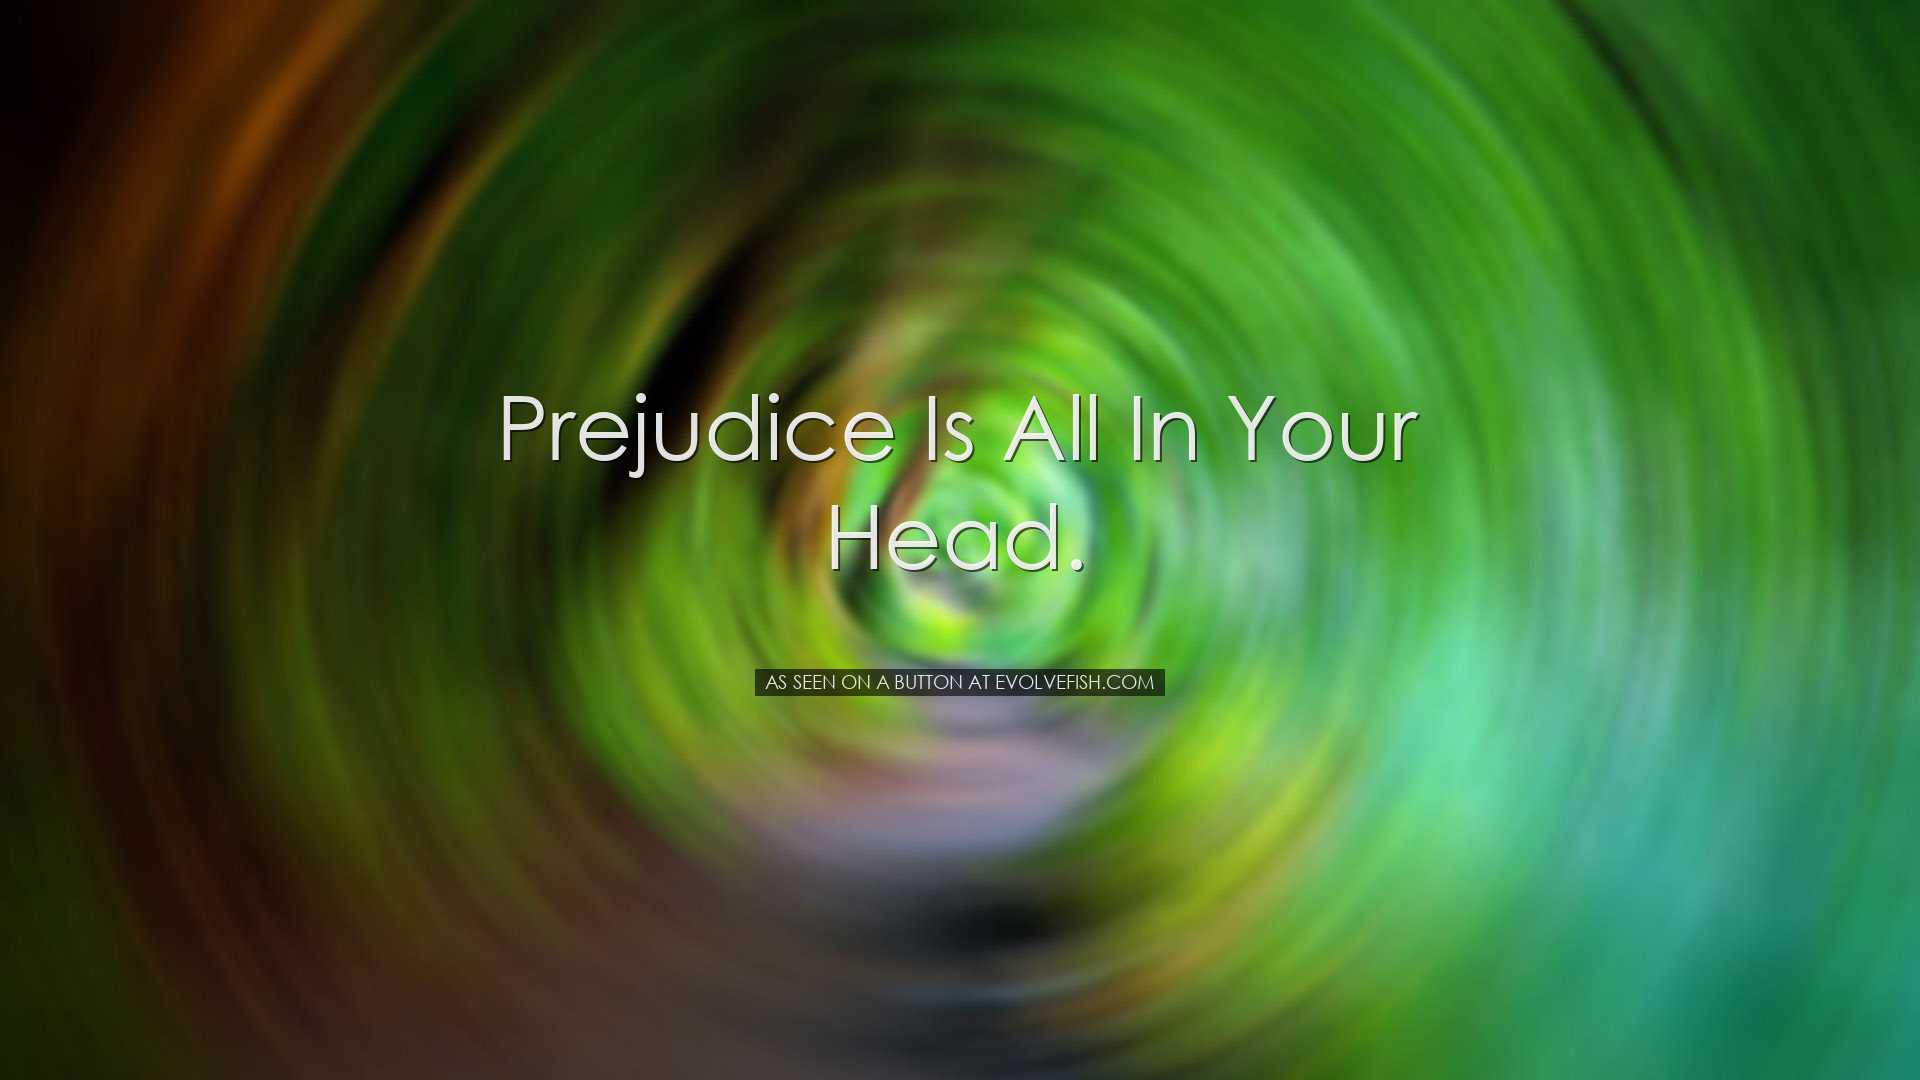 Prejudice is all in your head. - As seen on a button at evolvefish